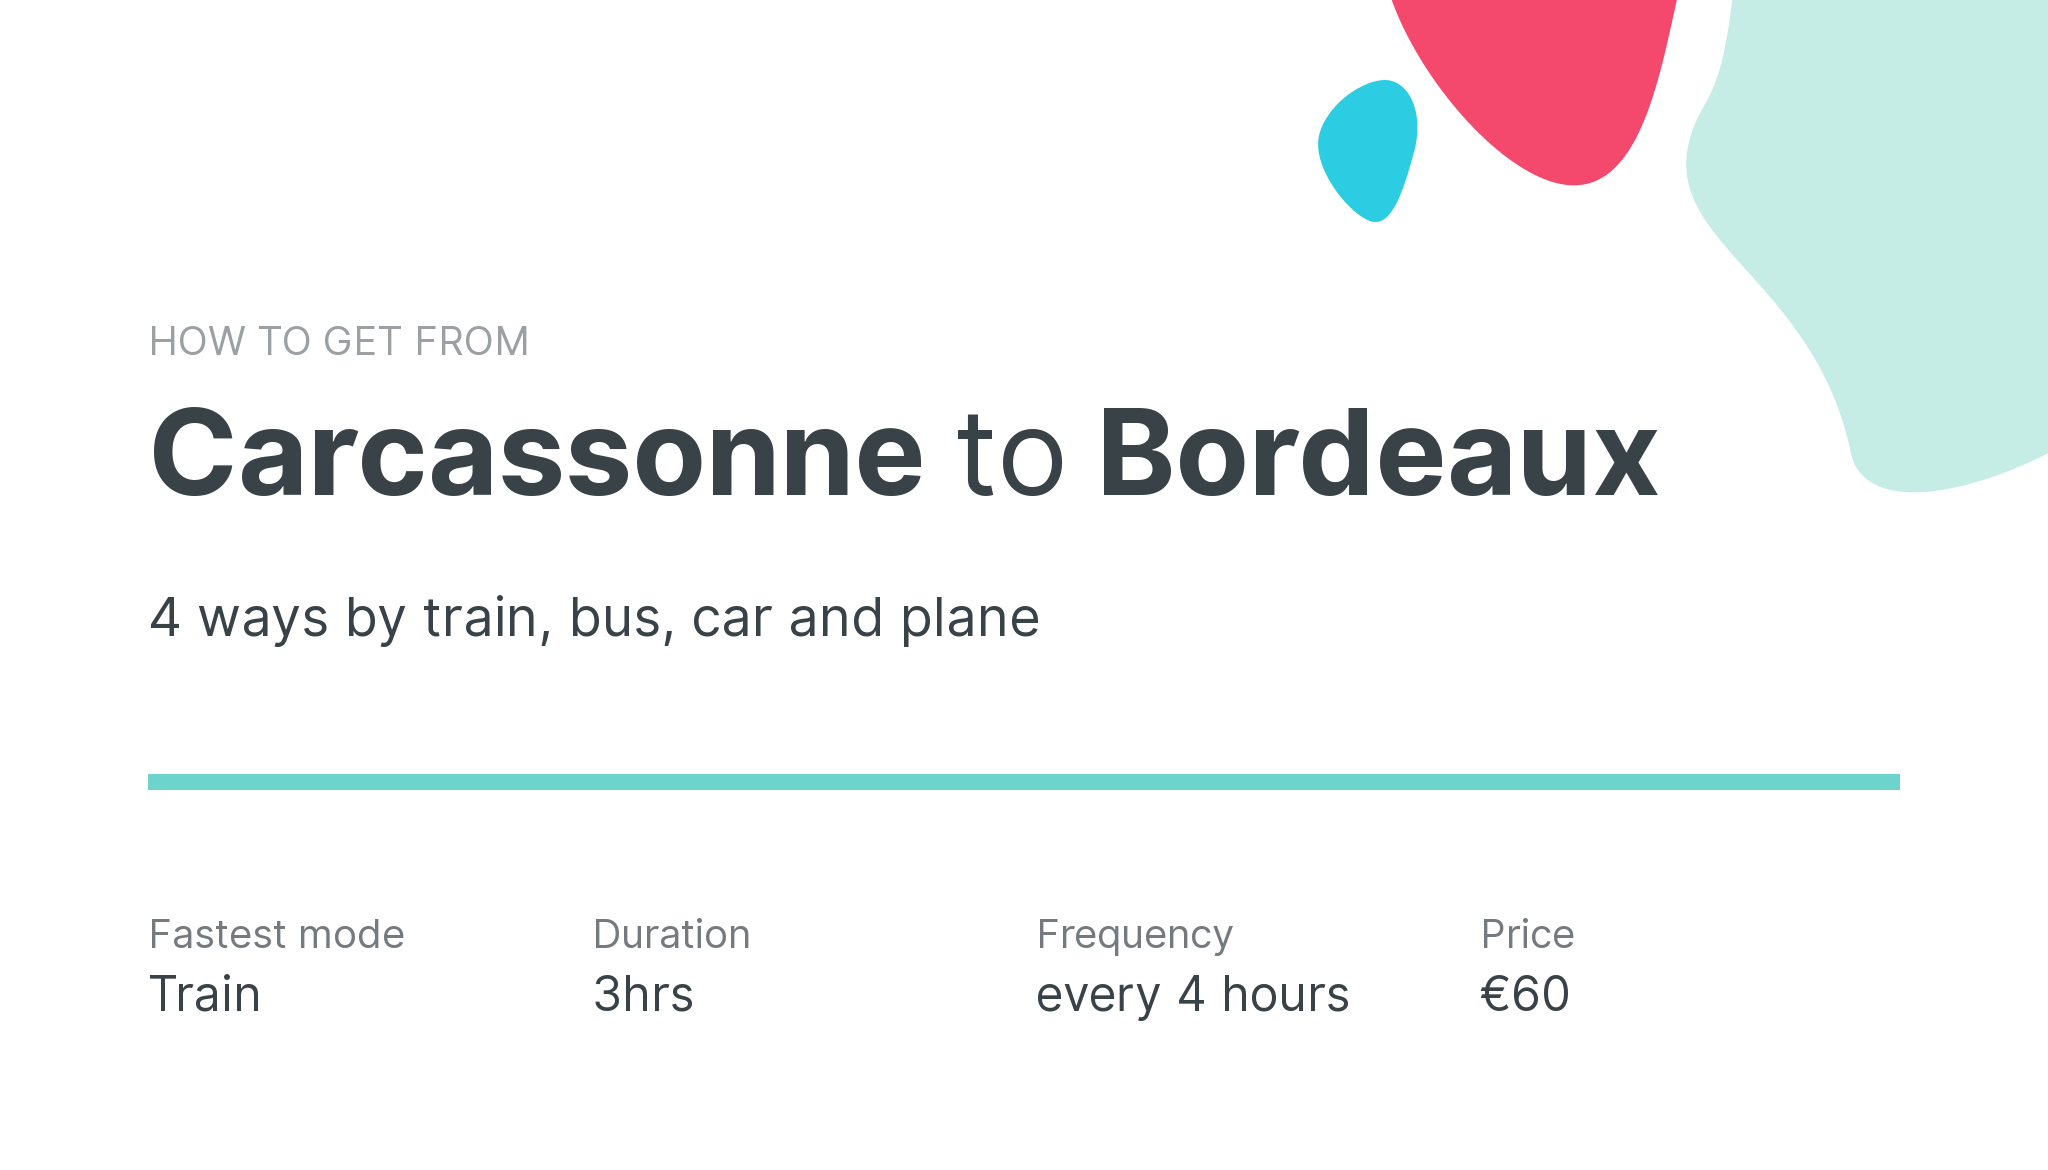 How do I get from Carcassonne to Bordeaux